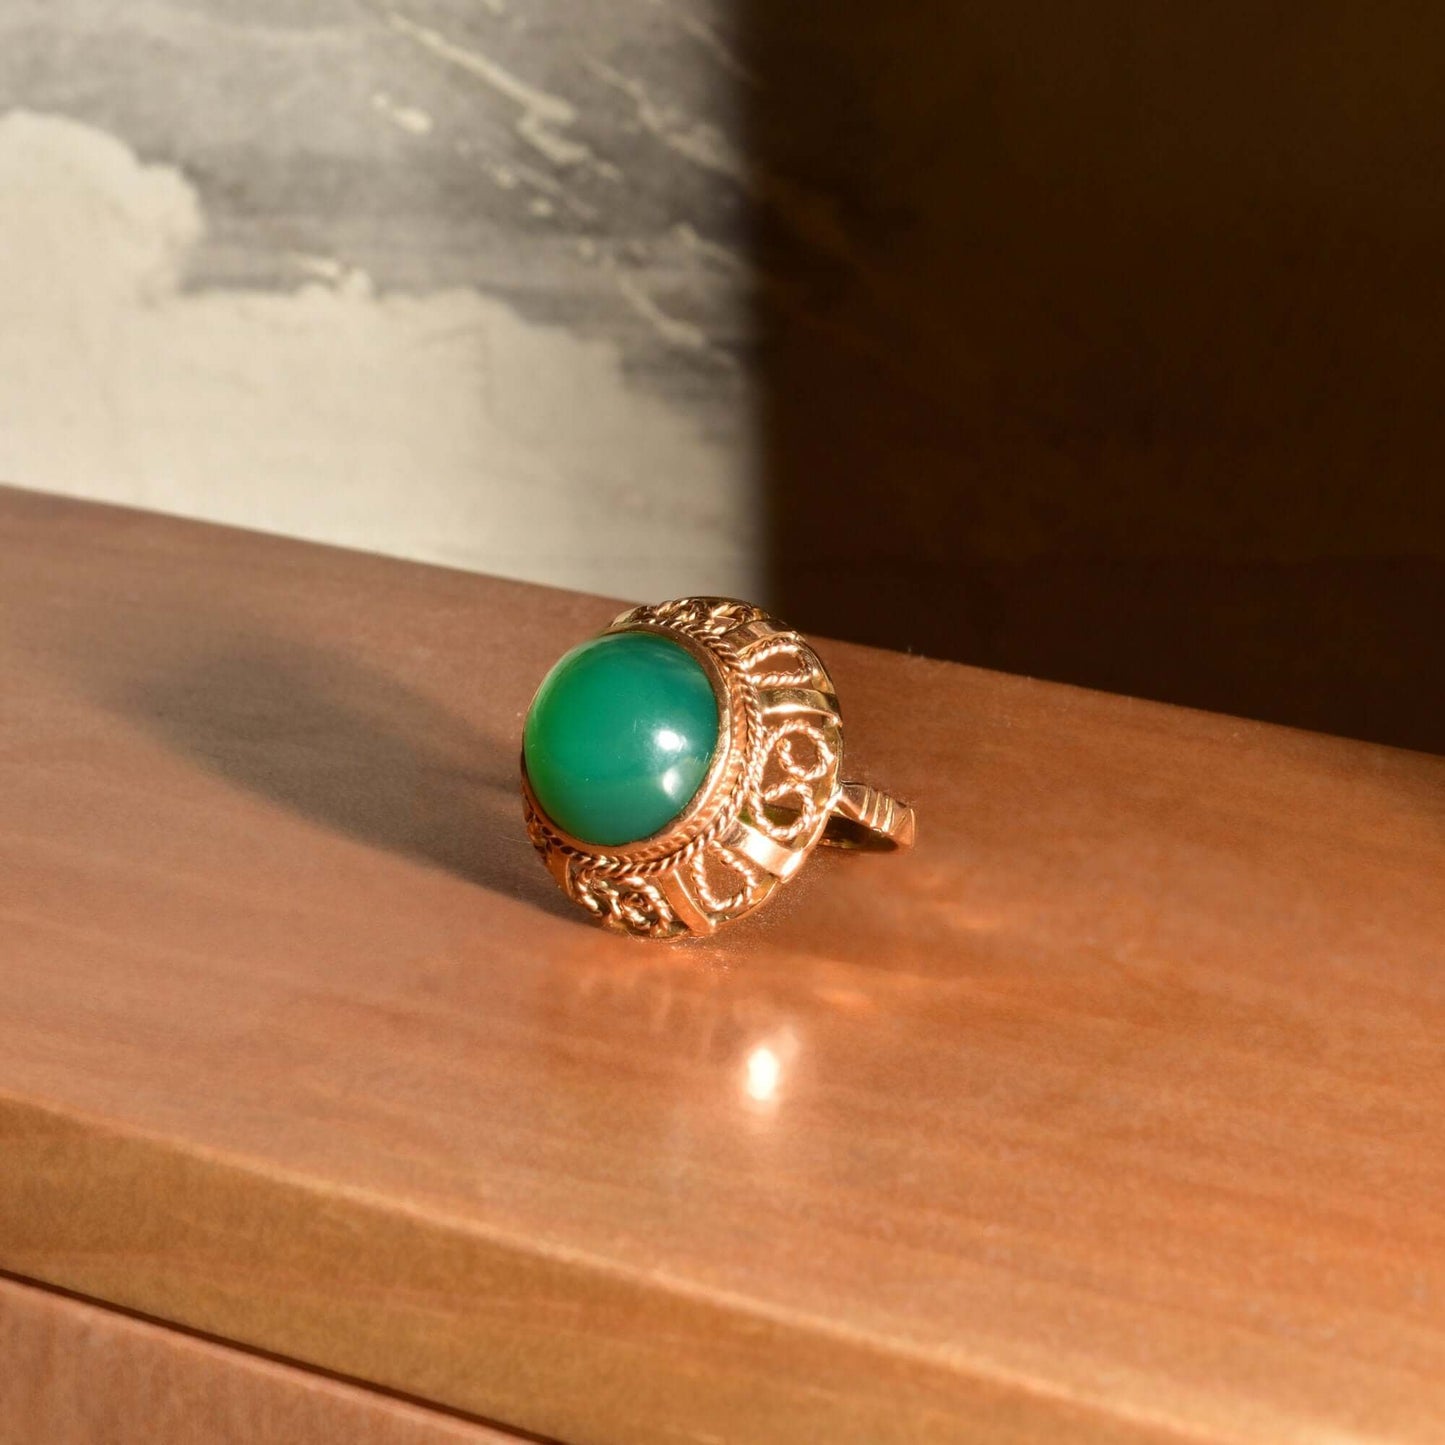 Chrysoprase Bombe Ring In 14K Yellow Gold, Ornate Filigree Designs, Vintage Cocktail Ring, Size 7 US